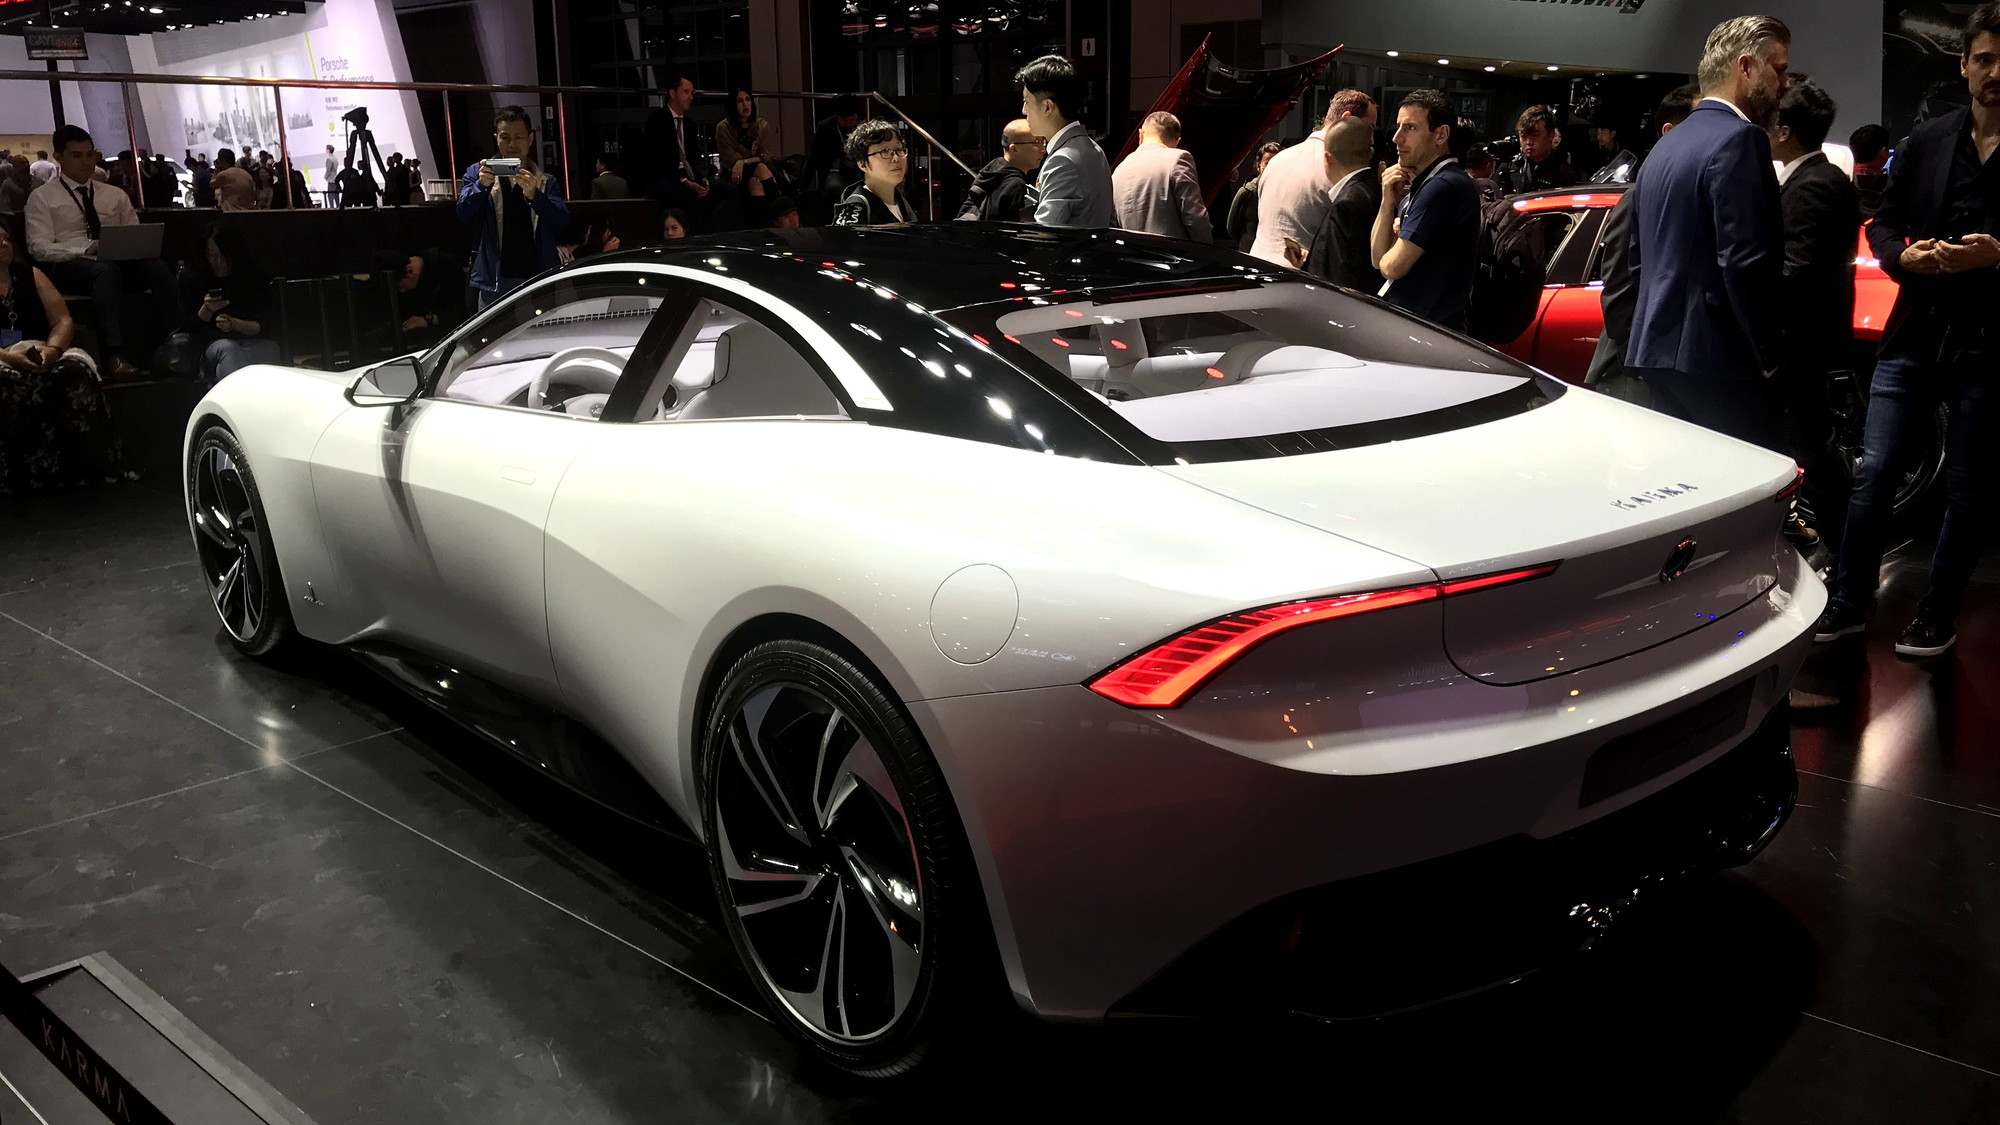 karma presents its electric car vision to china and vies for partners